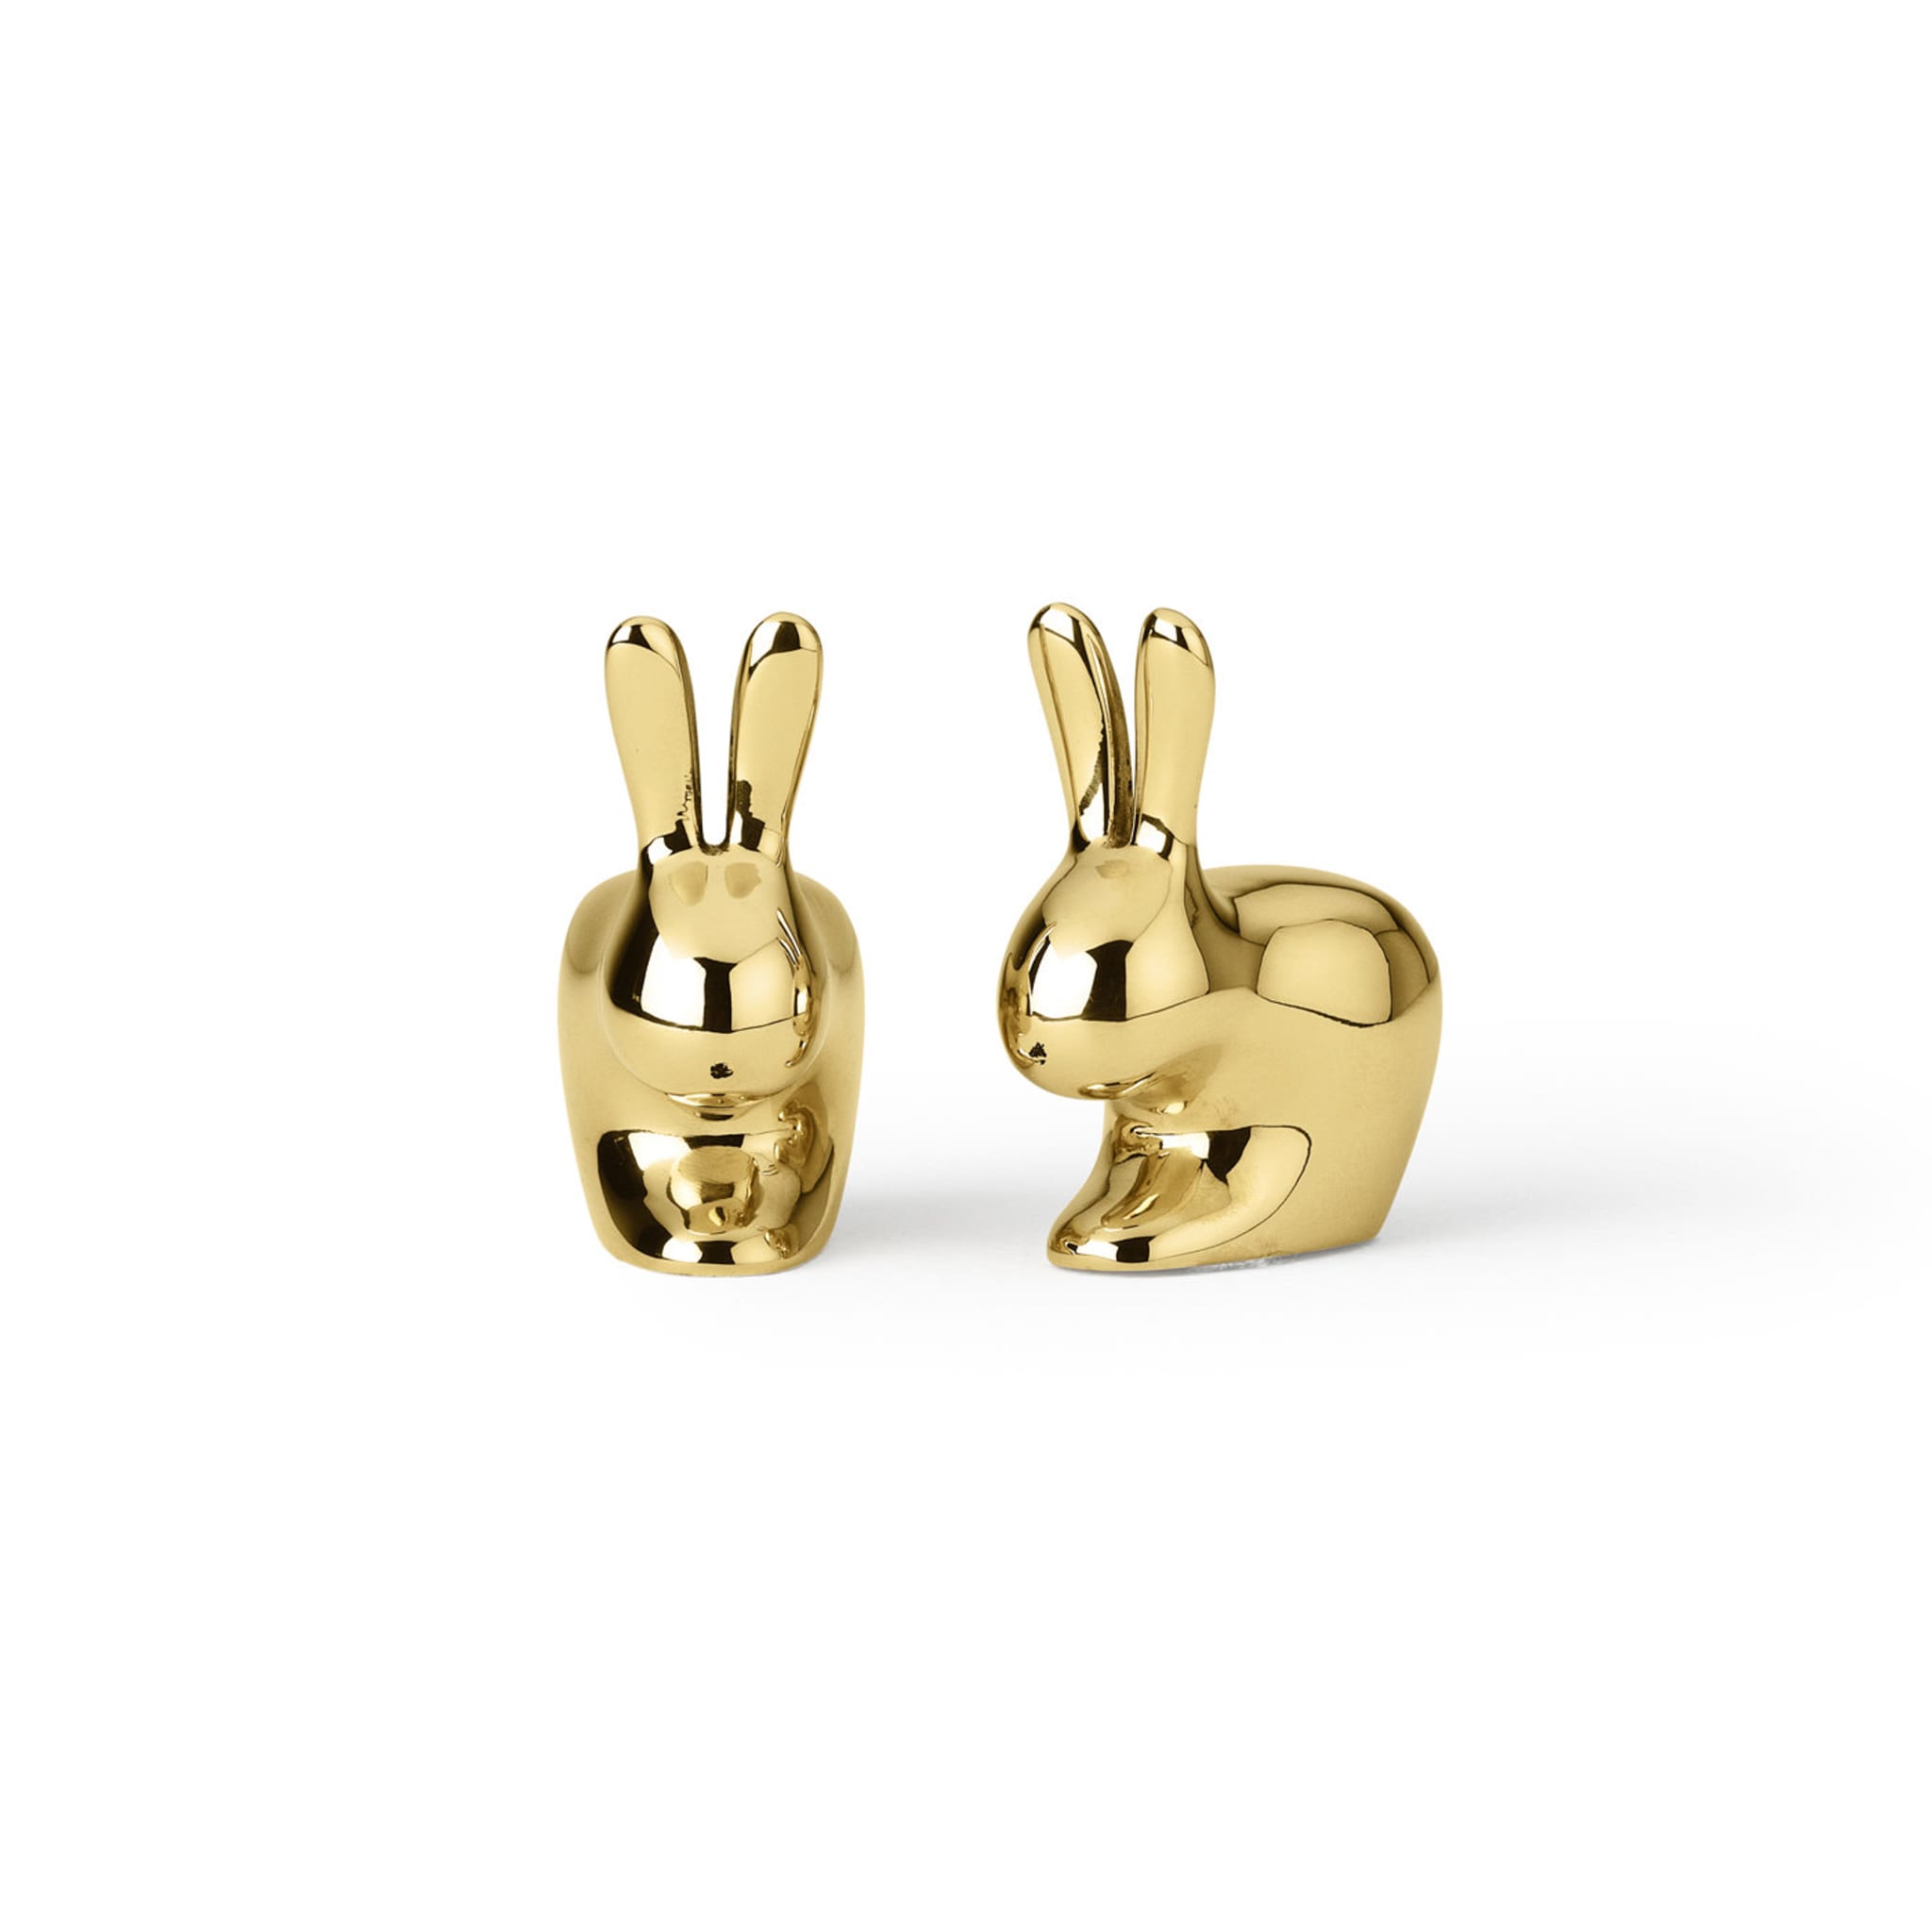 Rabbit Salt and Pepper Shaker in Brass Finish By Stefano Giovannoni - Alternative view 2